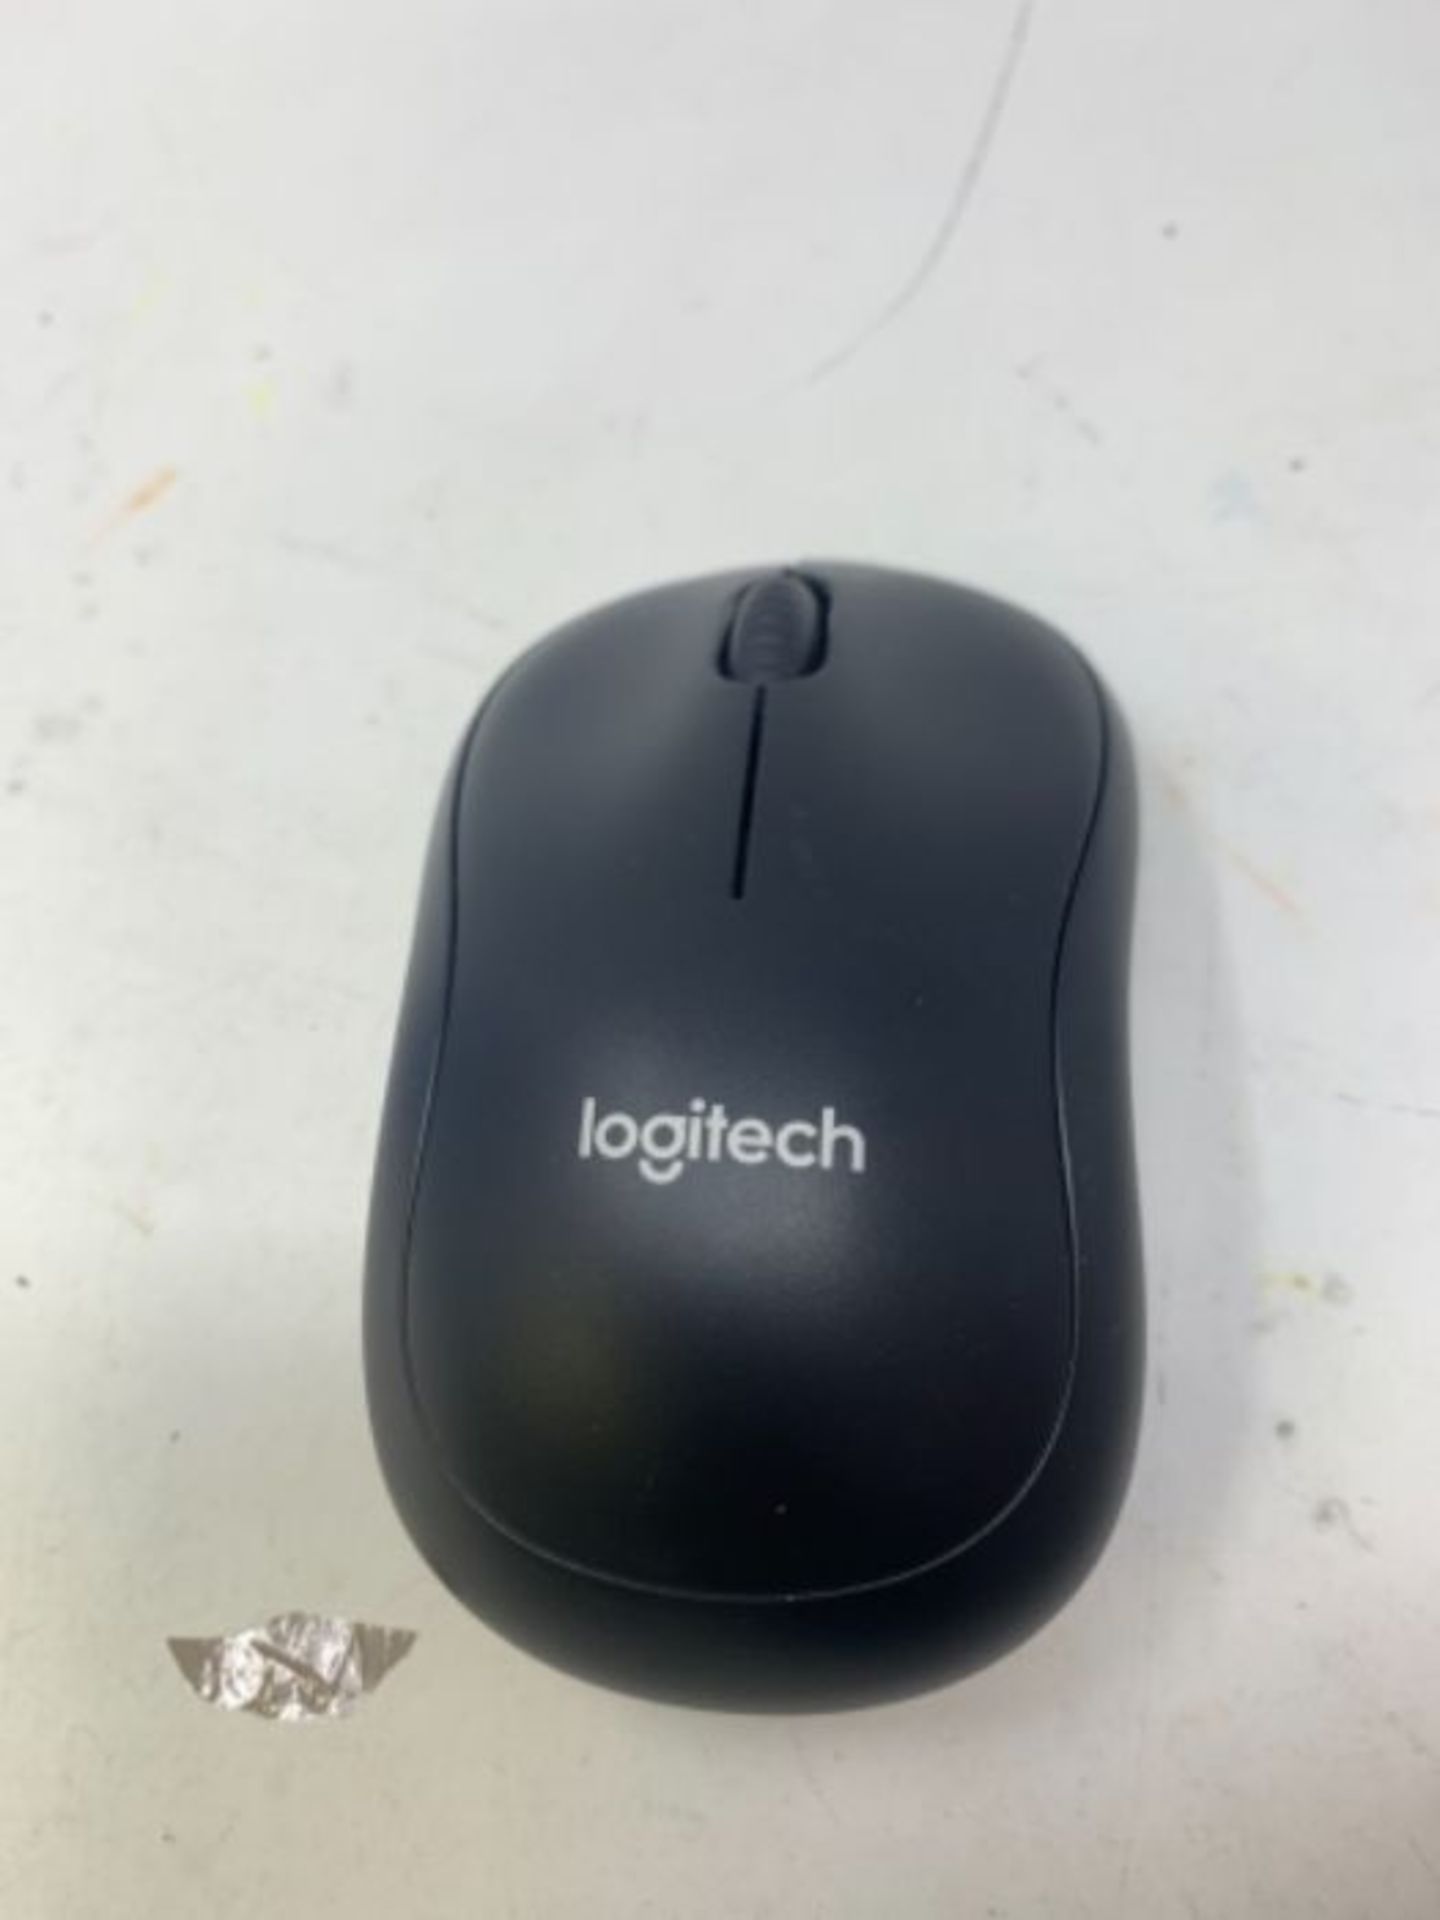 Logitech B220 Silent Wireless Mouse, 2.4GHz with Nano USB Receiver, 1000 DPI Optical T - Image 2 of 2